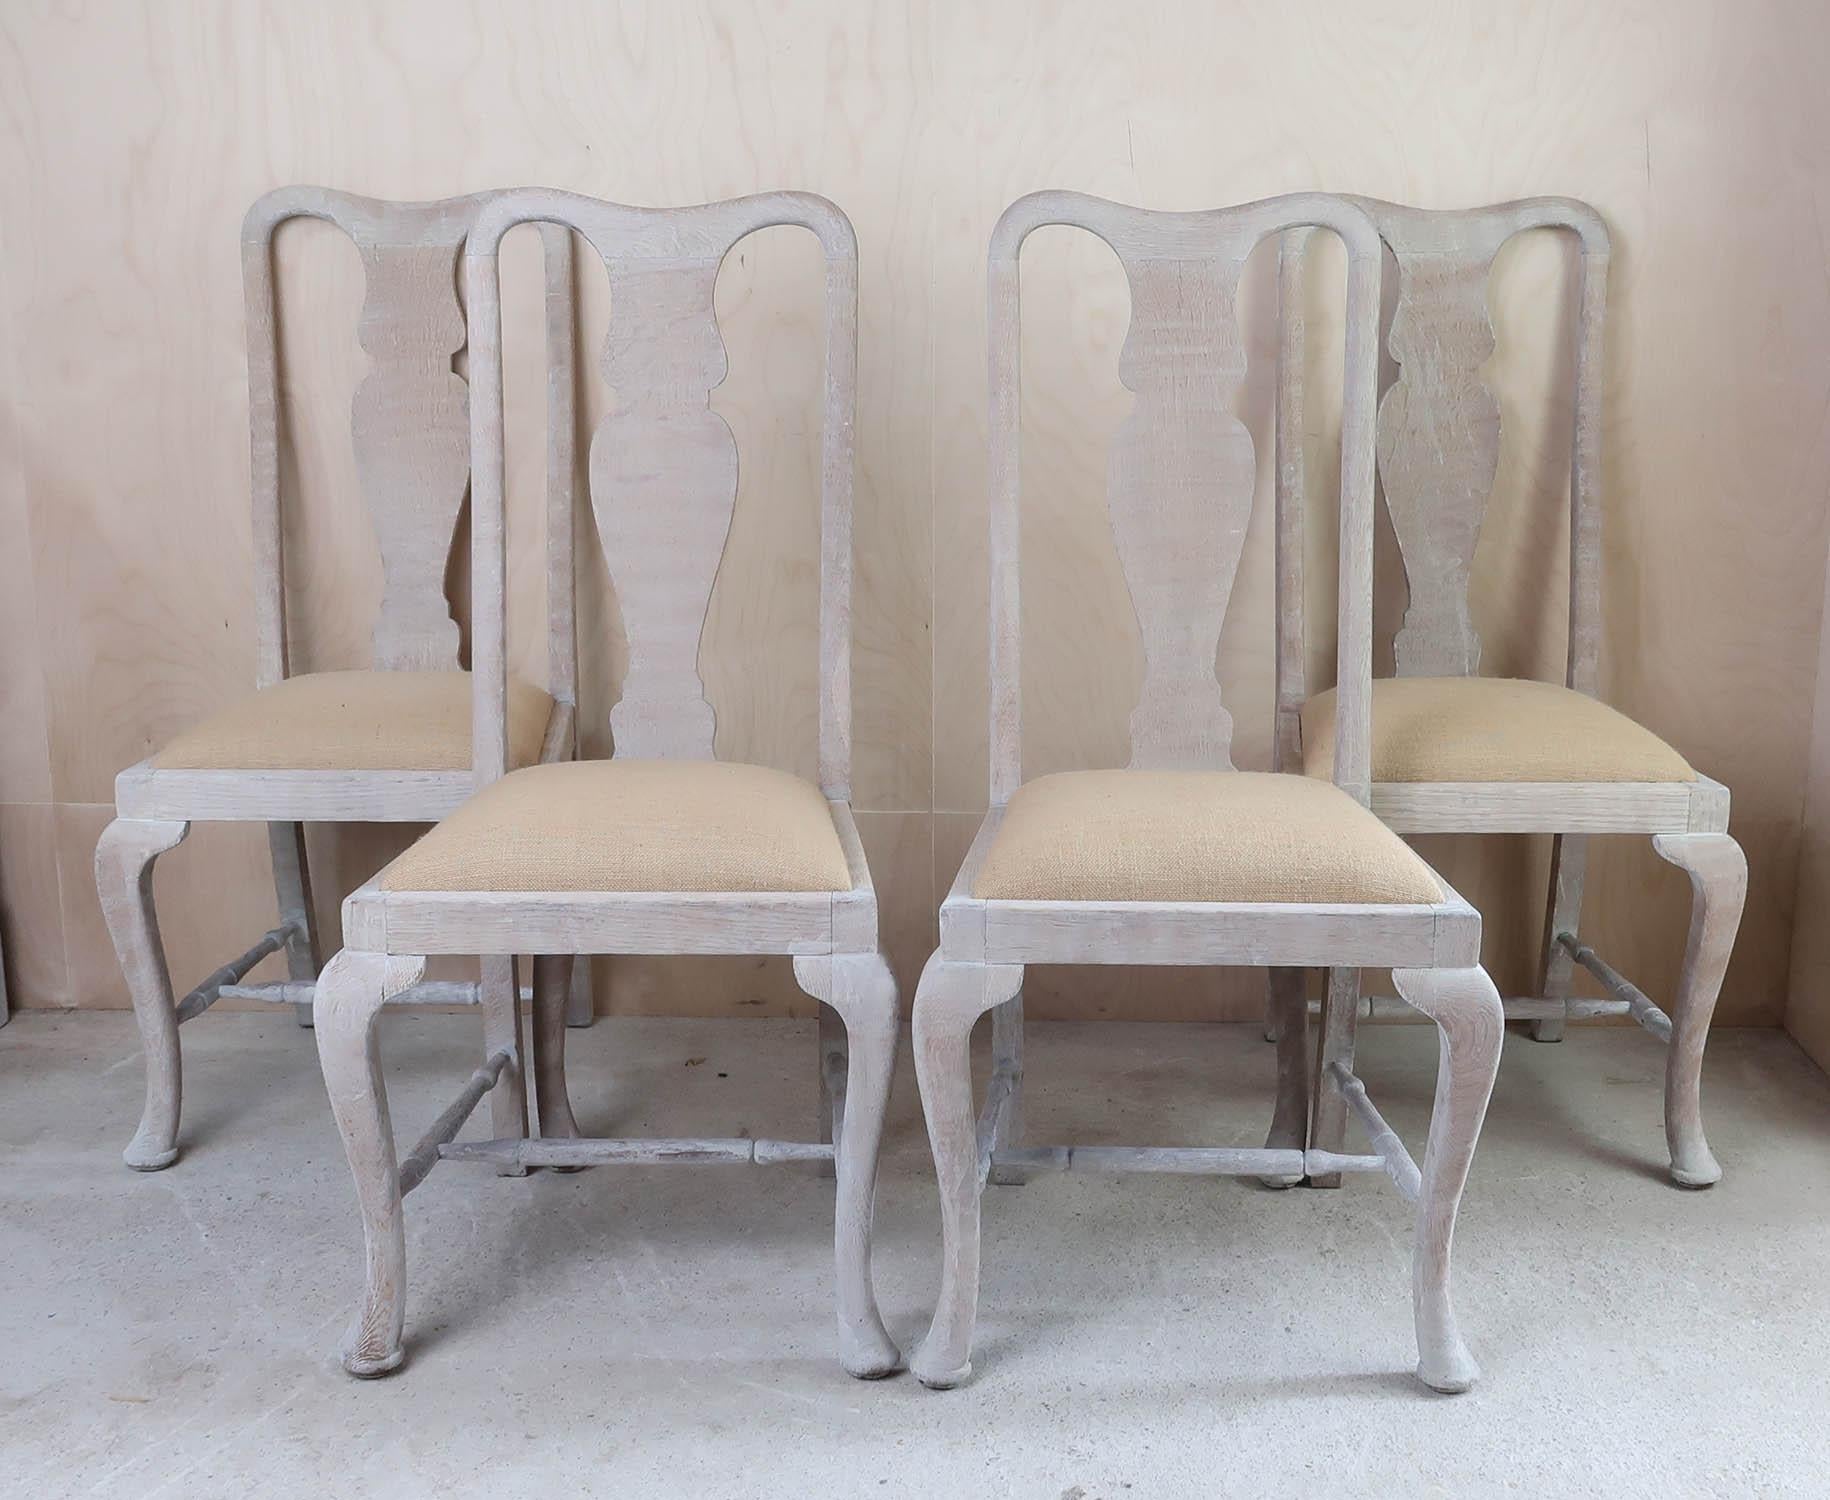 A delightful matching set of 4 English limed oak chairs. 

They have been recently limed to enhance the beautiful grain in the wood.

The seats have been re-upholstered in hessian or burlap.

The chairs are 1920s.

The chairs are sturdy. They have